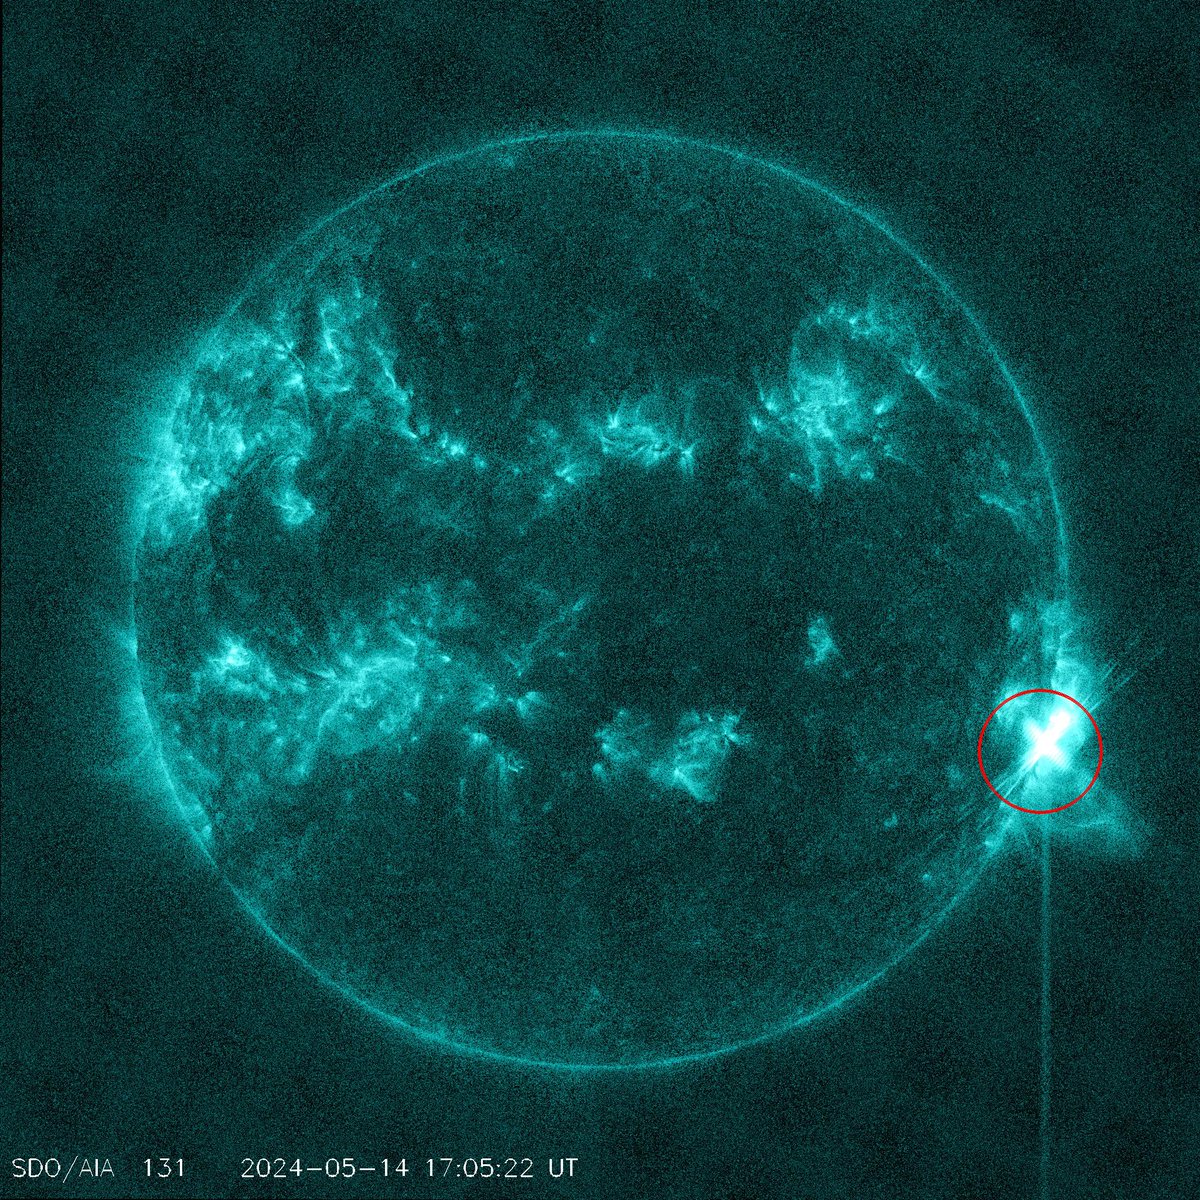 Major X8.79 flare from sunspot region 3664
Follow live on spaceweather.live/l/flare